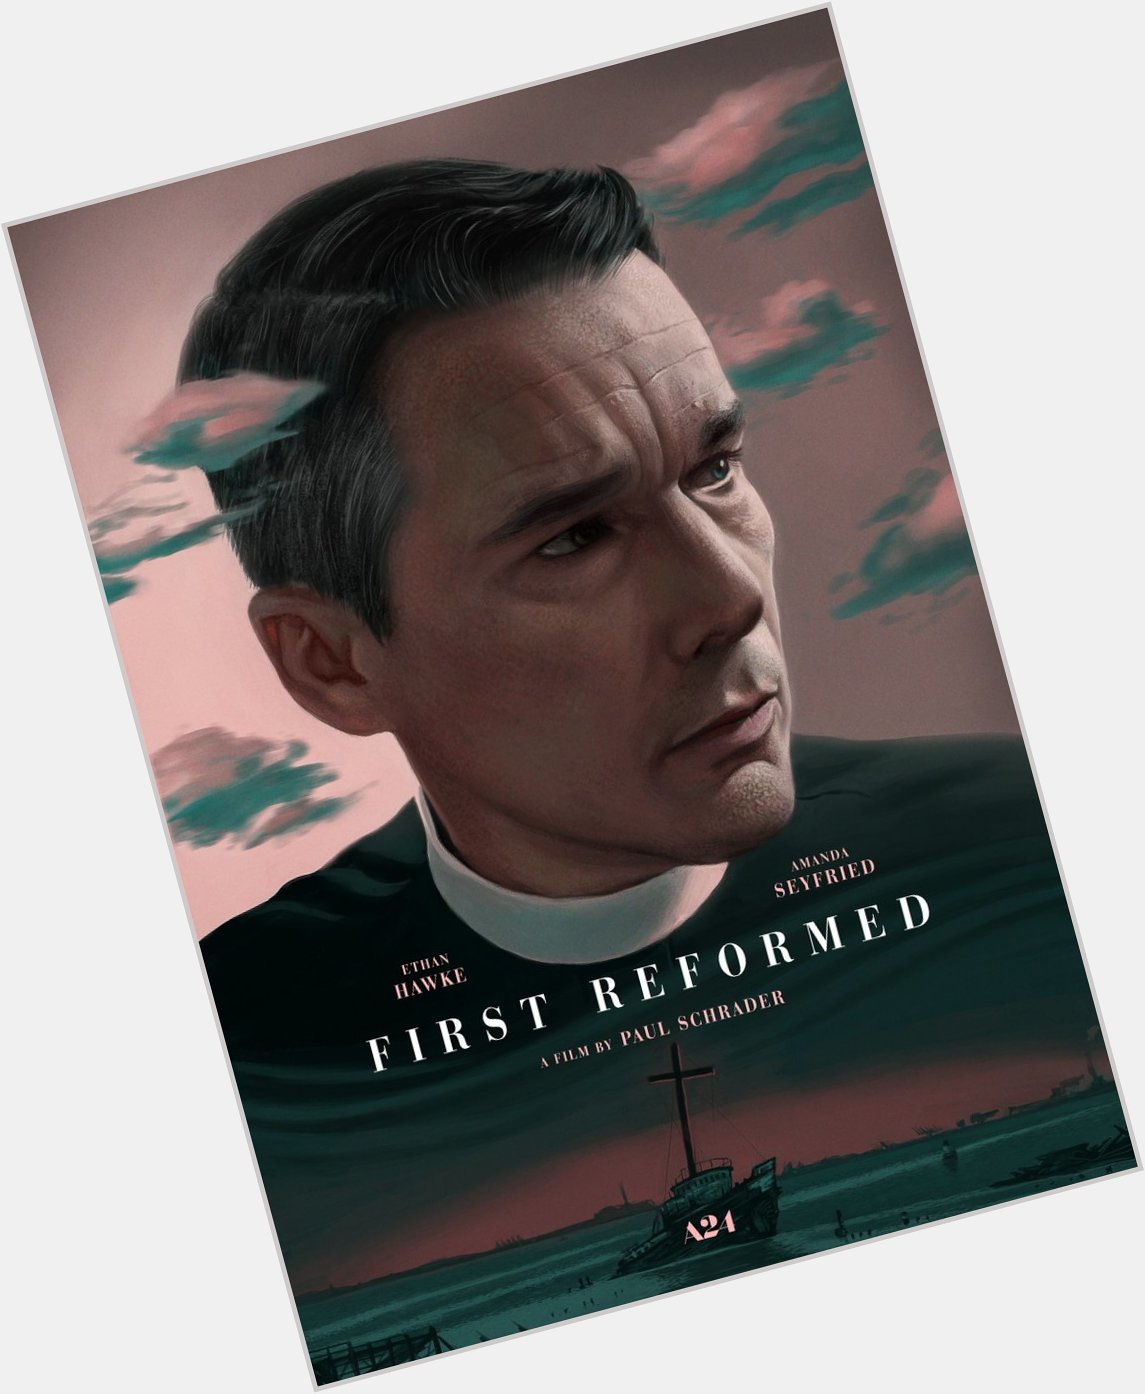 Happy birthday, Ethan Hawke!
This was my reimagined First Reformed (2018) poster, an A24 gem. 